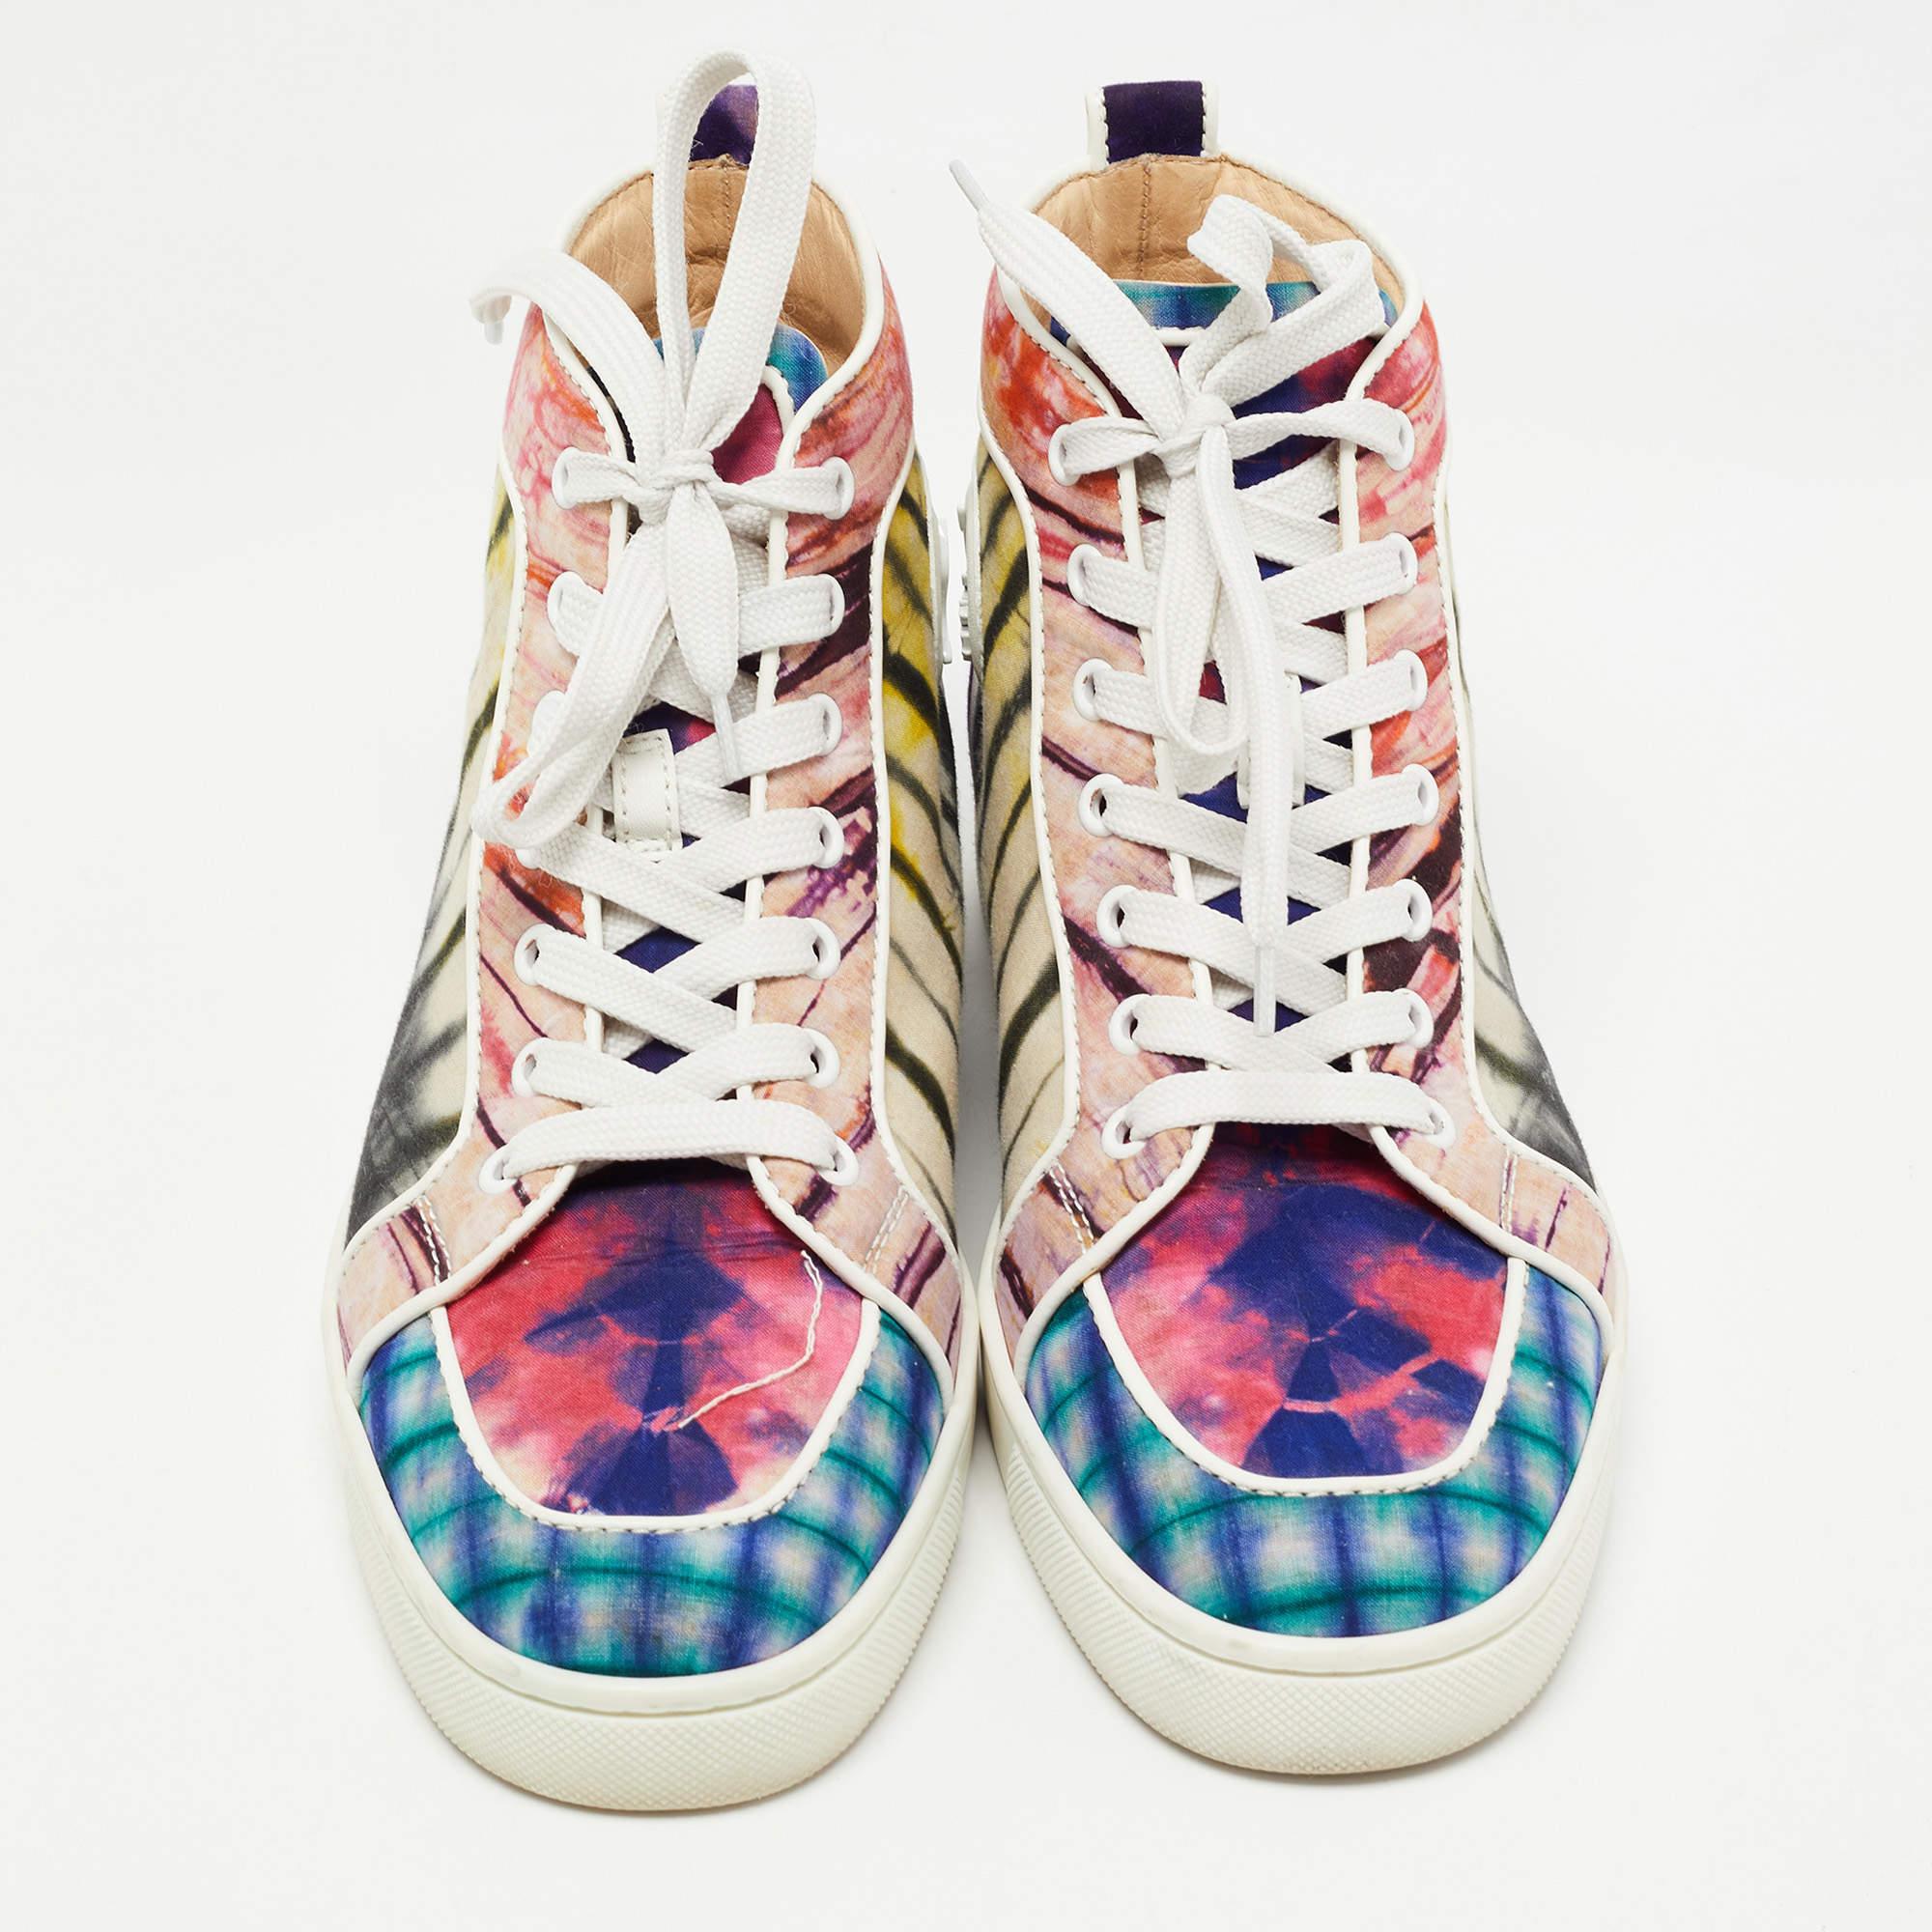 Women's Christian Louboutin Multicolor Fabric Tie Dye High Top Sneakers Size 39.5 For Sale